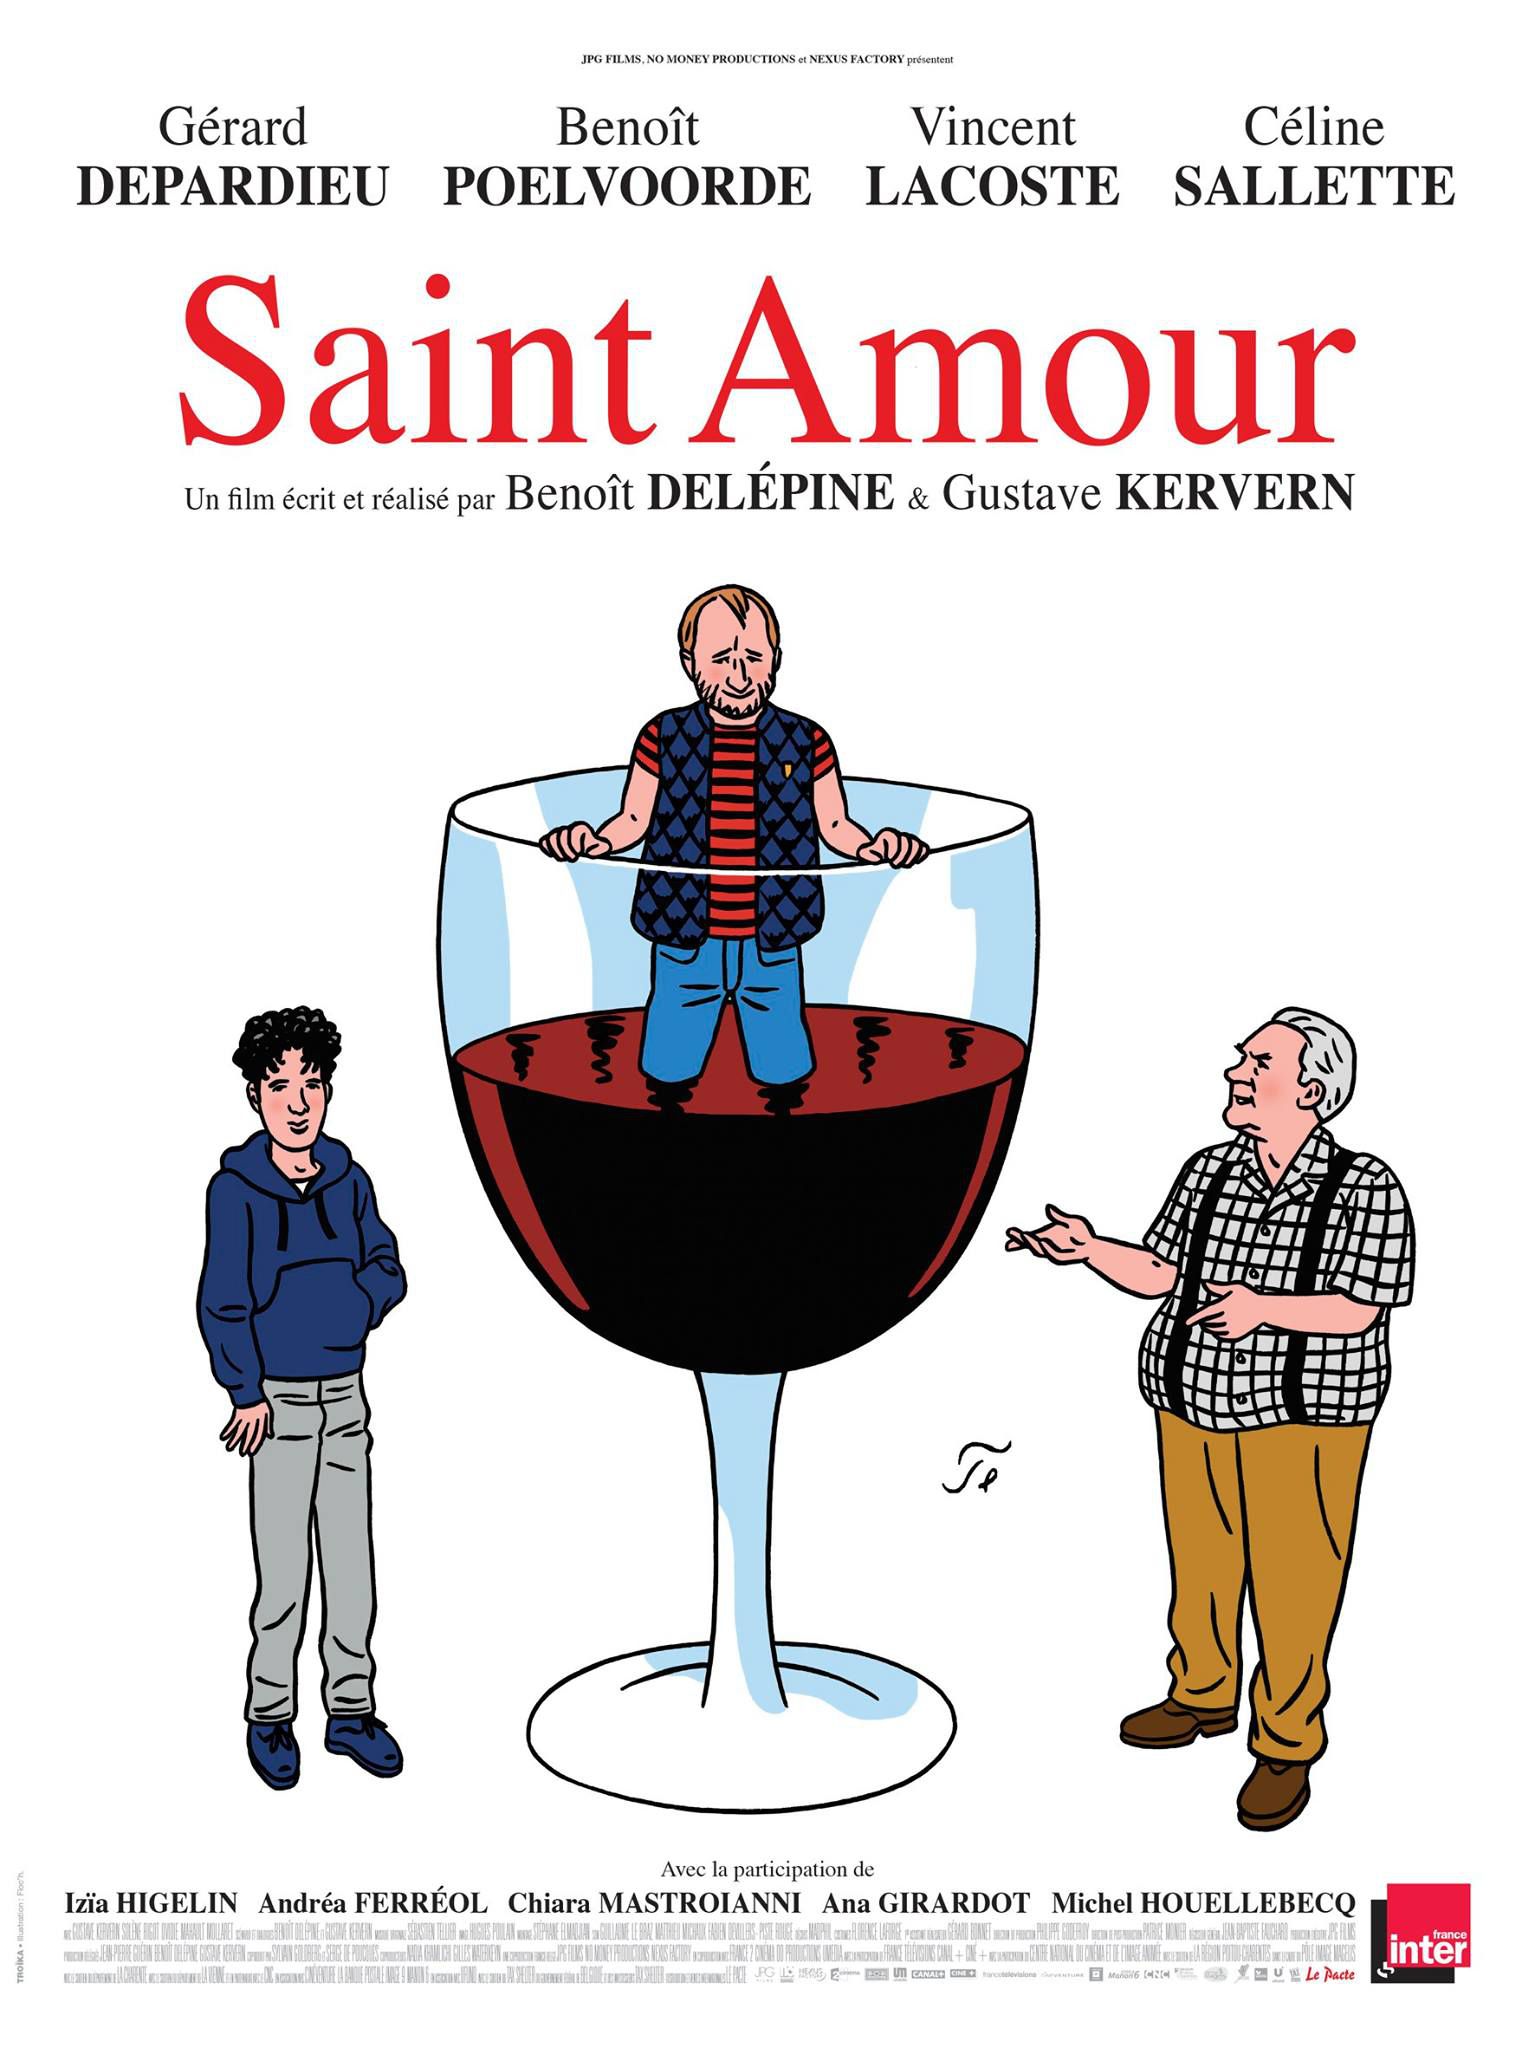 Saint Amour - Film (2016) streaming VF gratuit complet